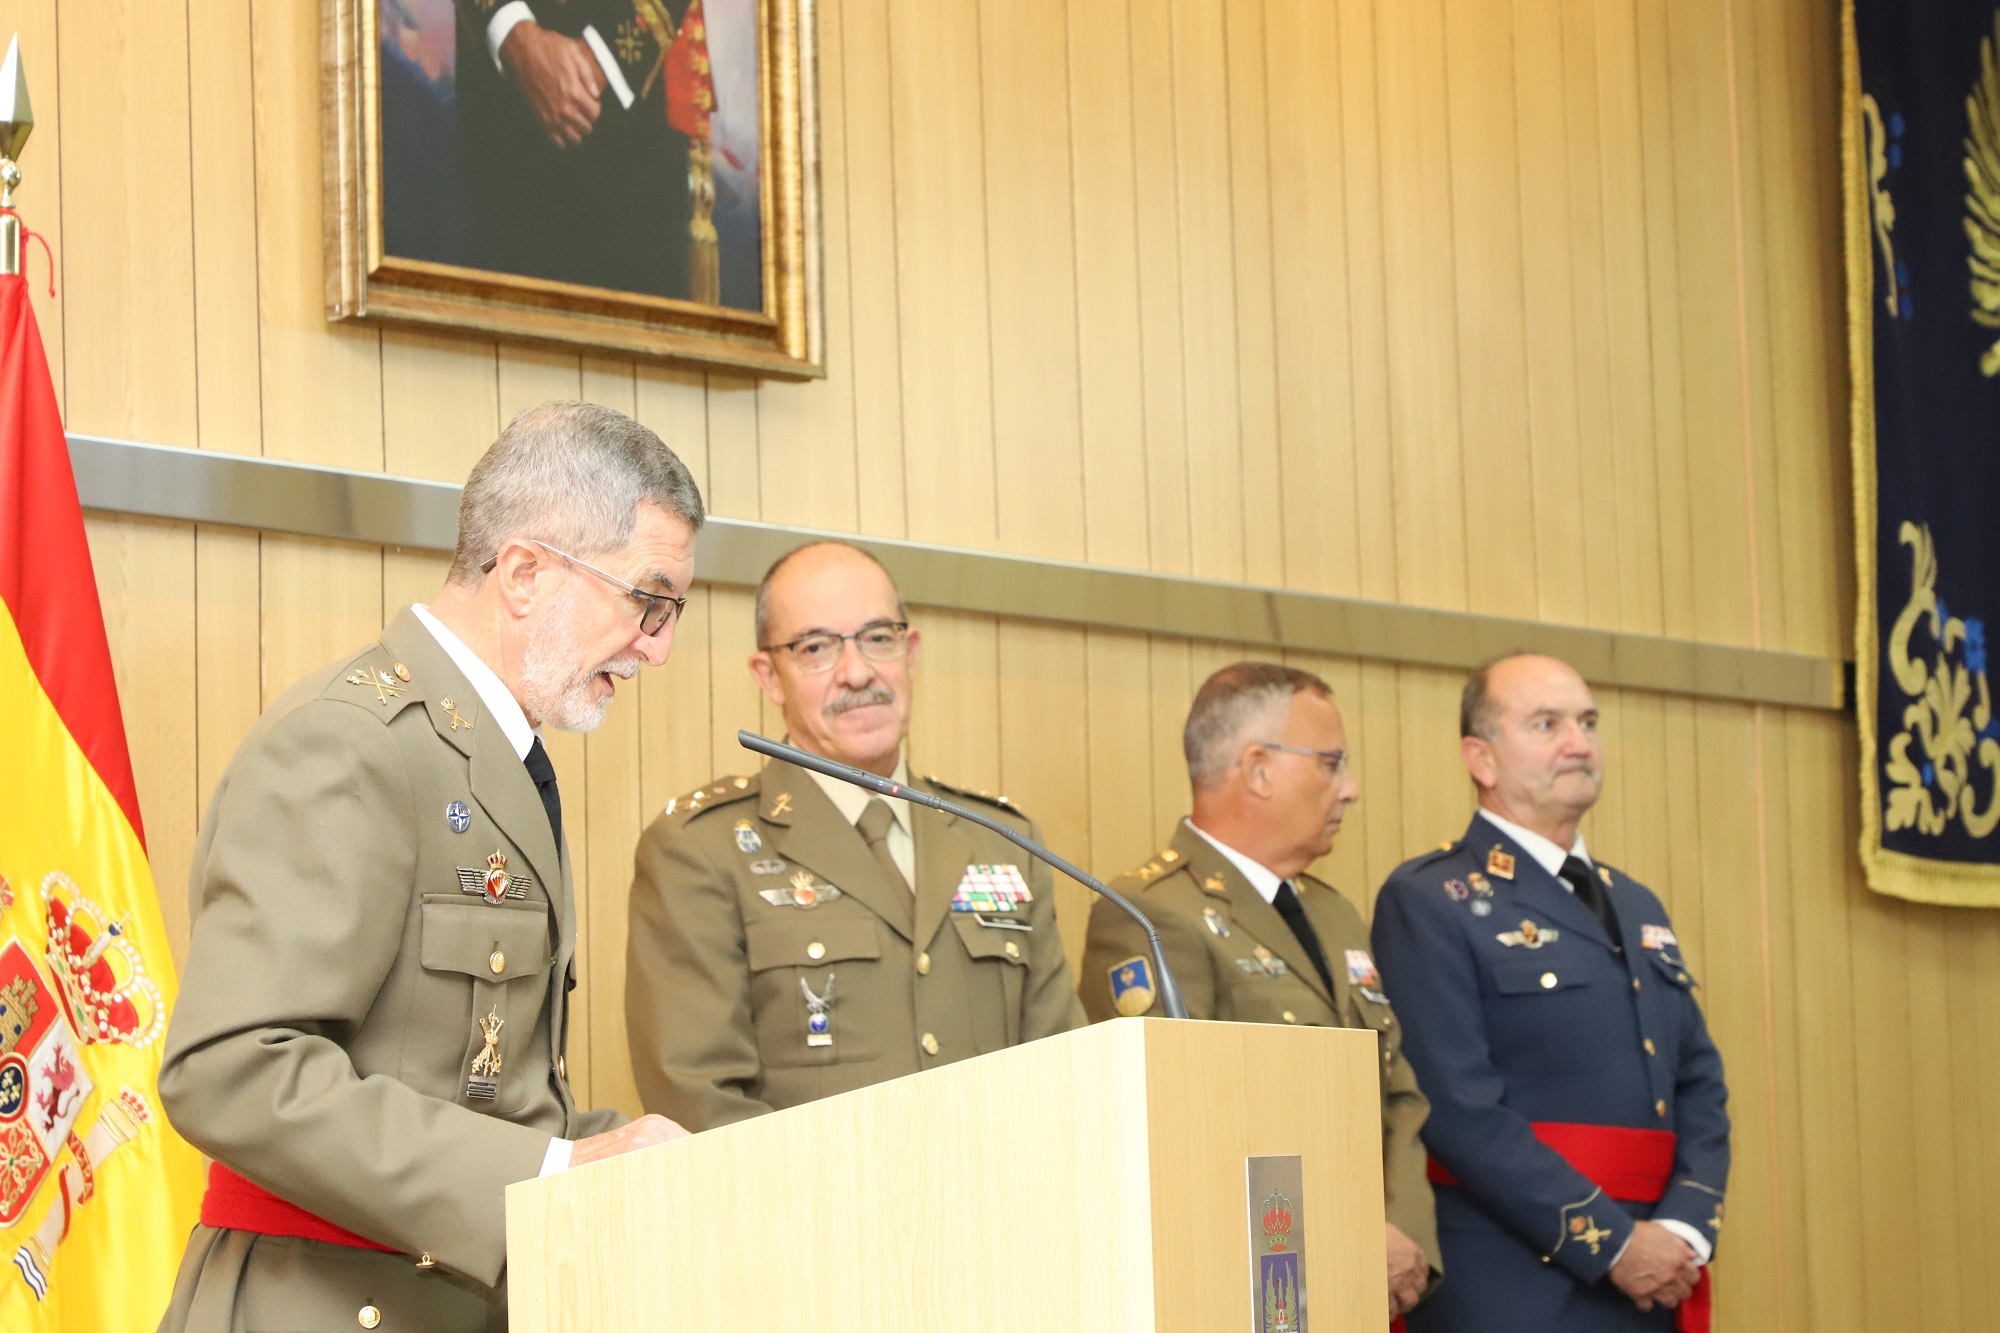 Major General Antonio Romero takes command as Director of the Spanish Armed Forces Intelligence Centre